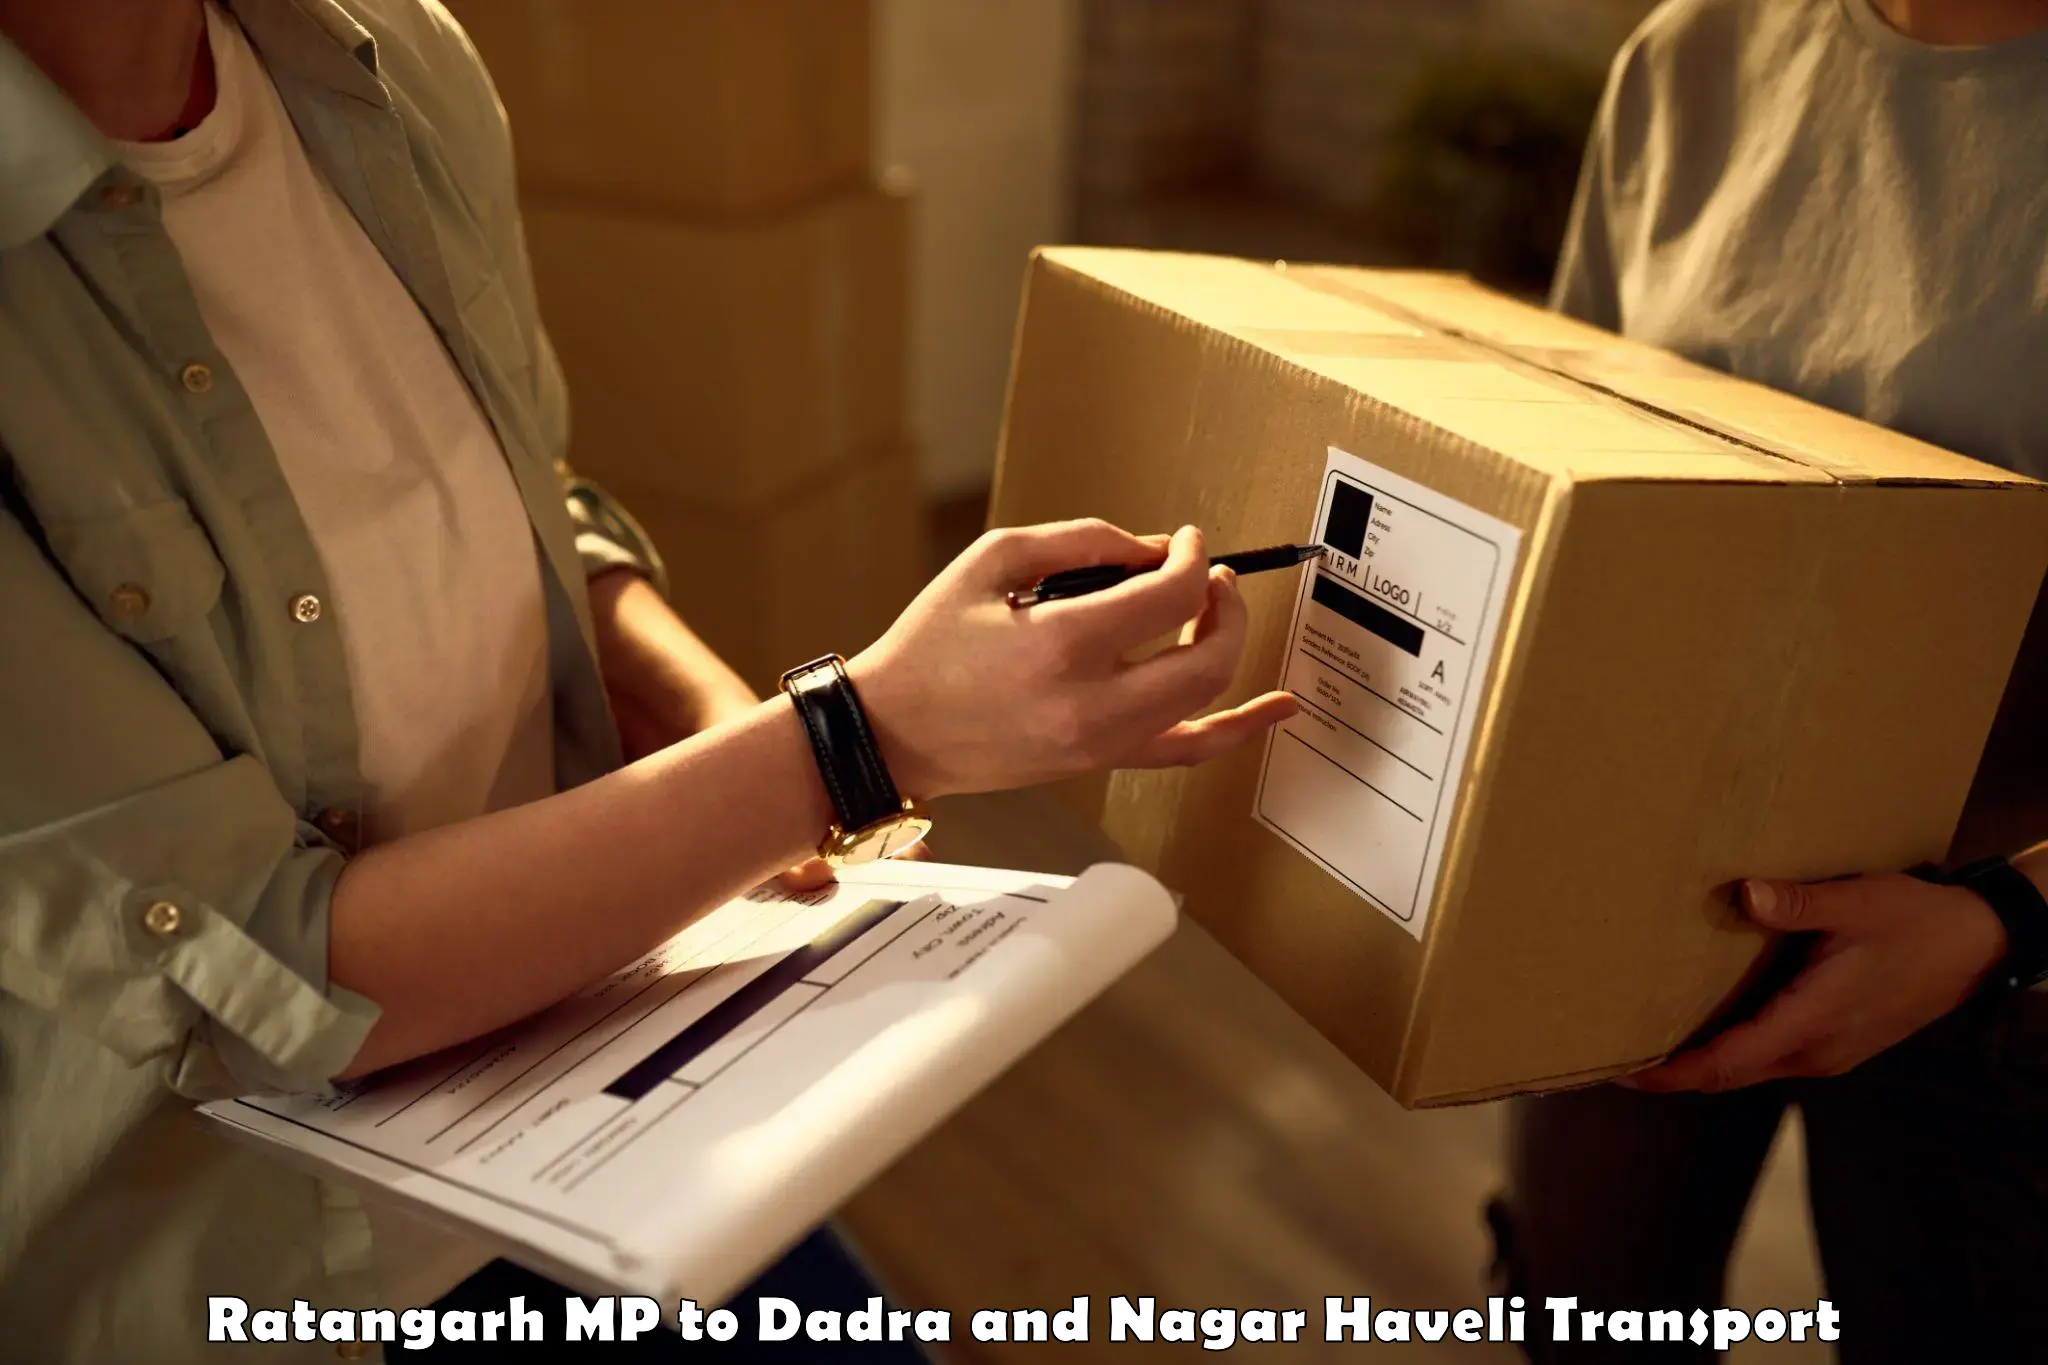 Luggage transport services in Ratangarh MP to Dadra and Nagar Haveli